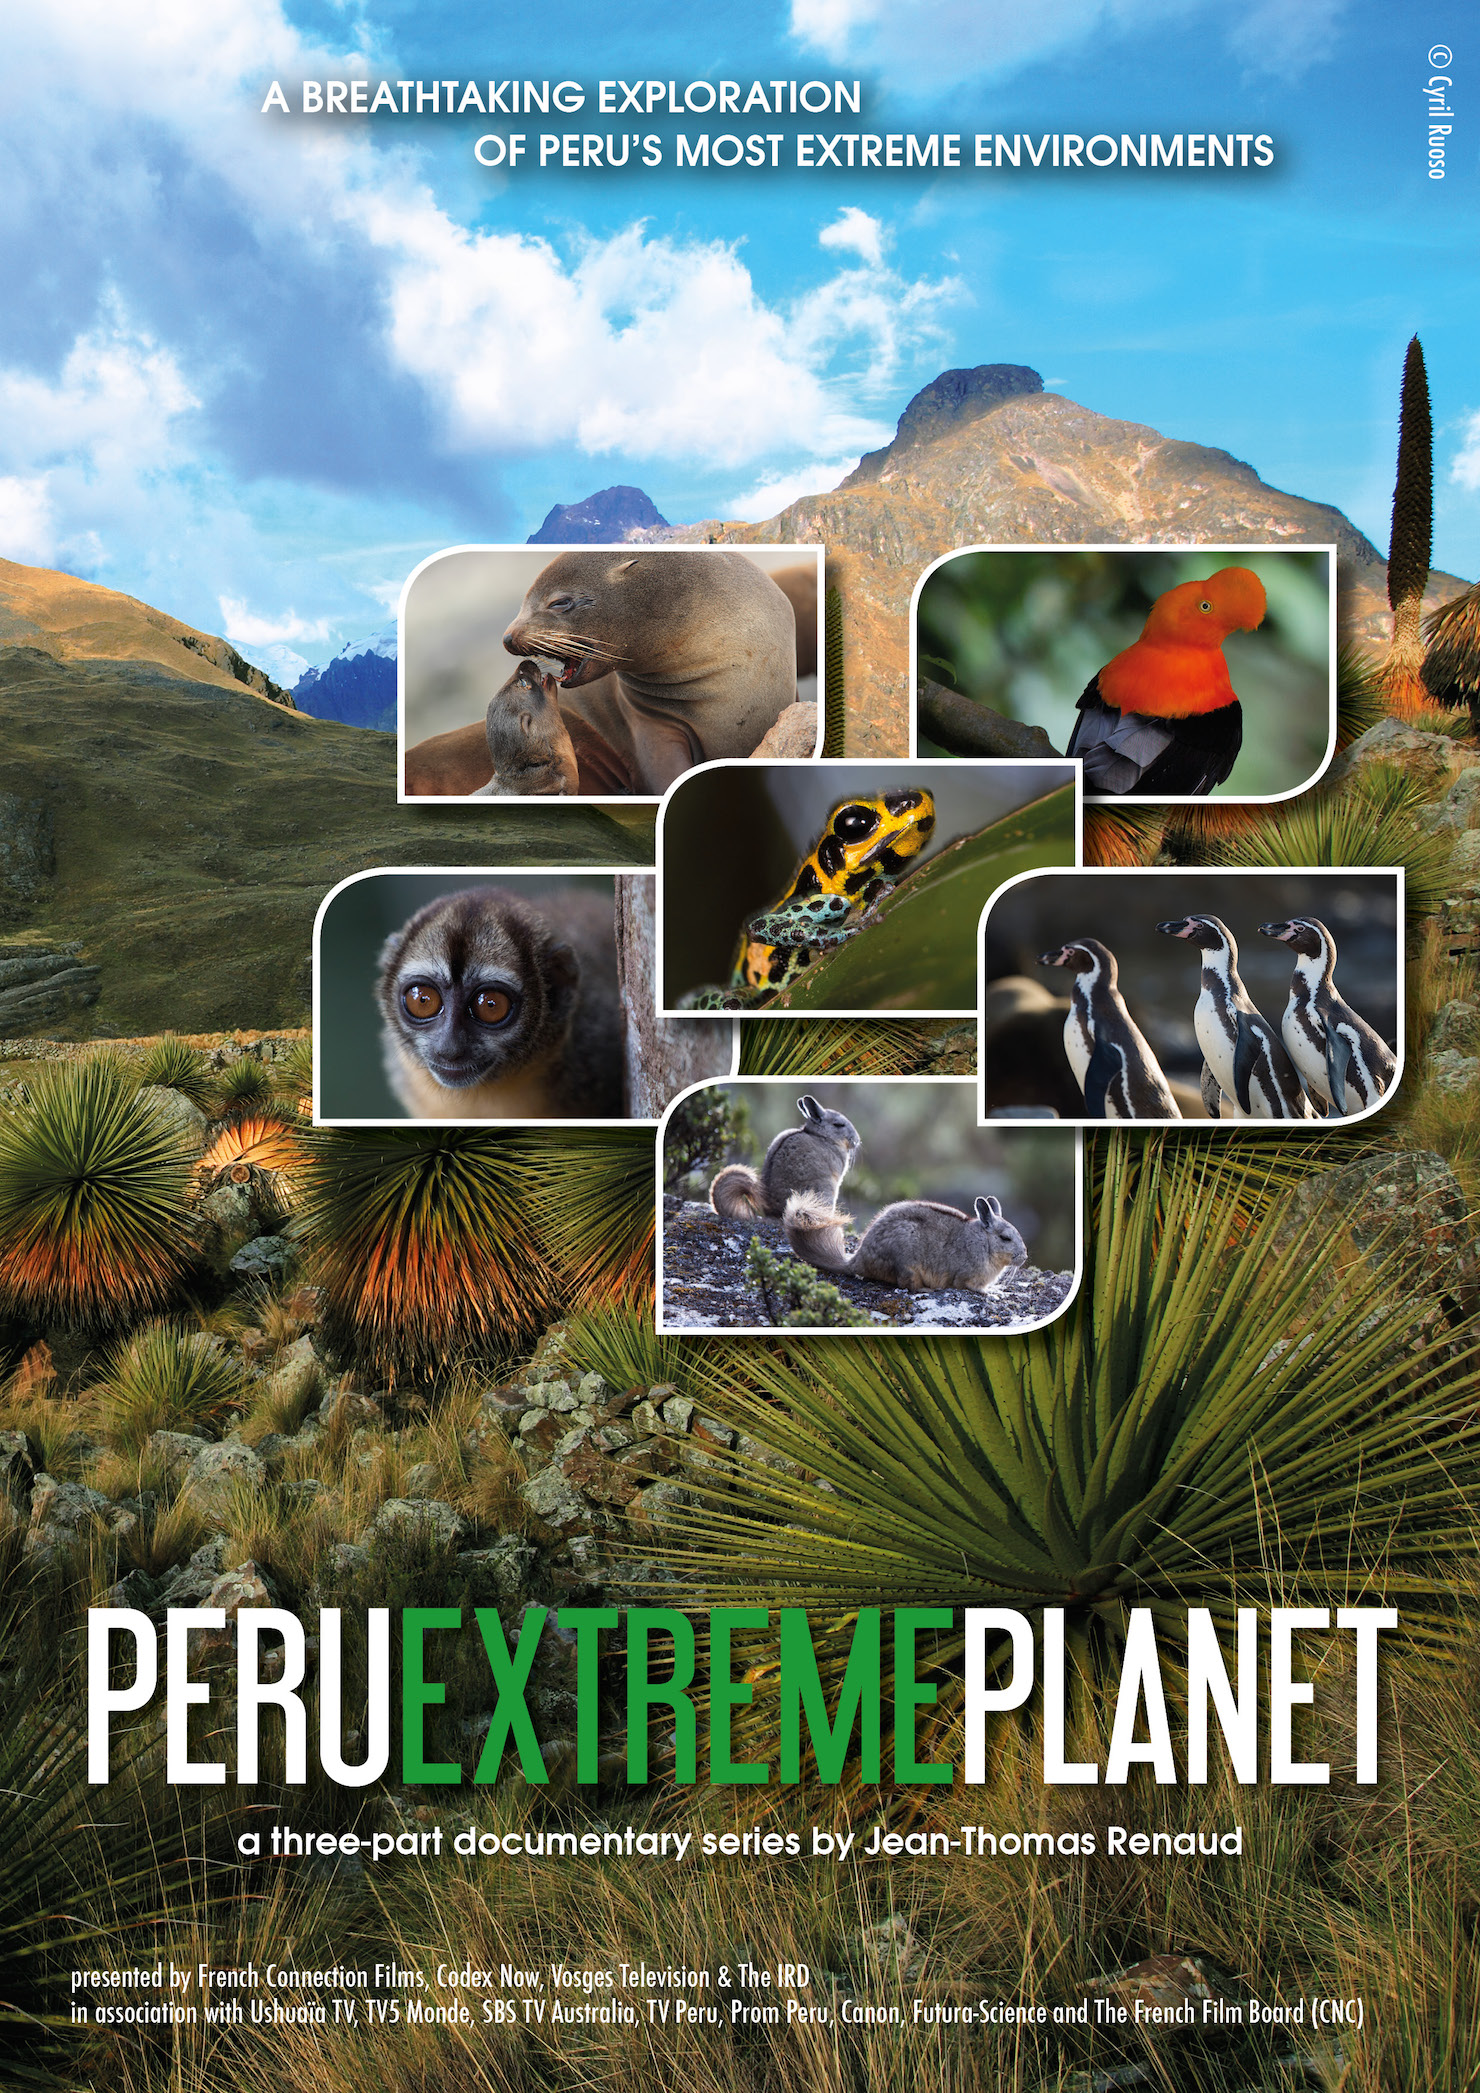 French Connection Films | “Peru: Extreme Planet” Now Available on DVD!